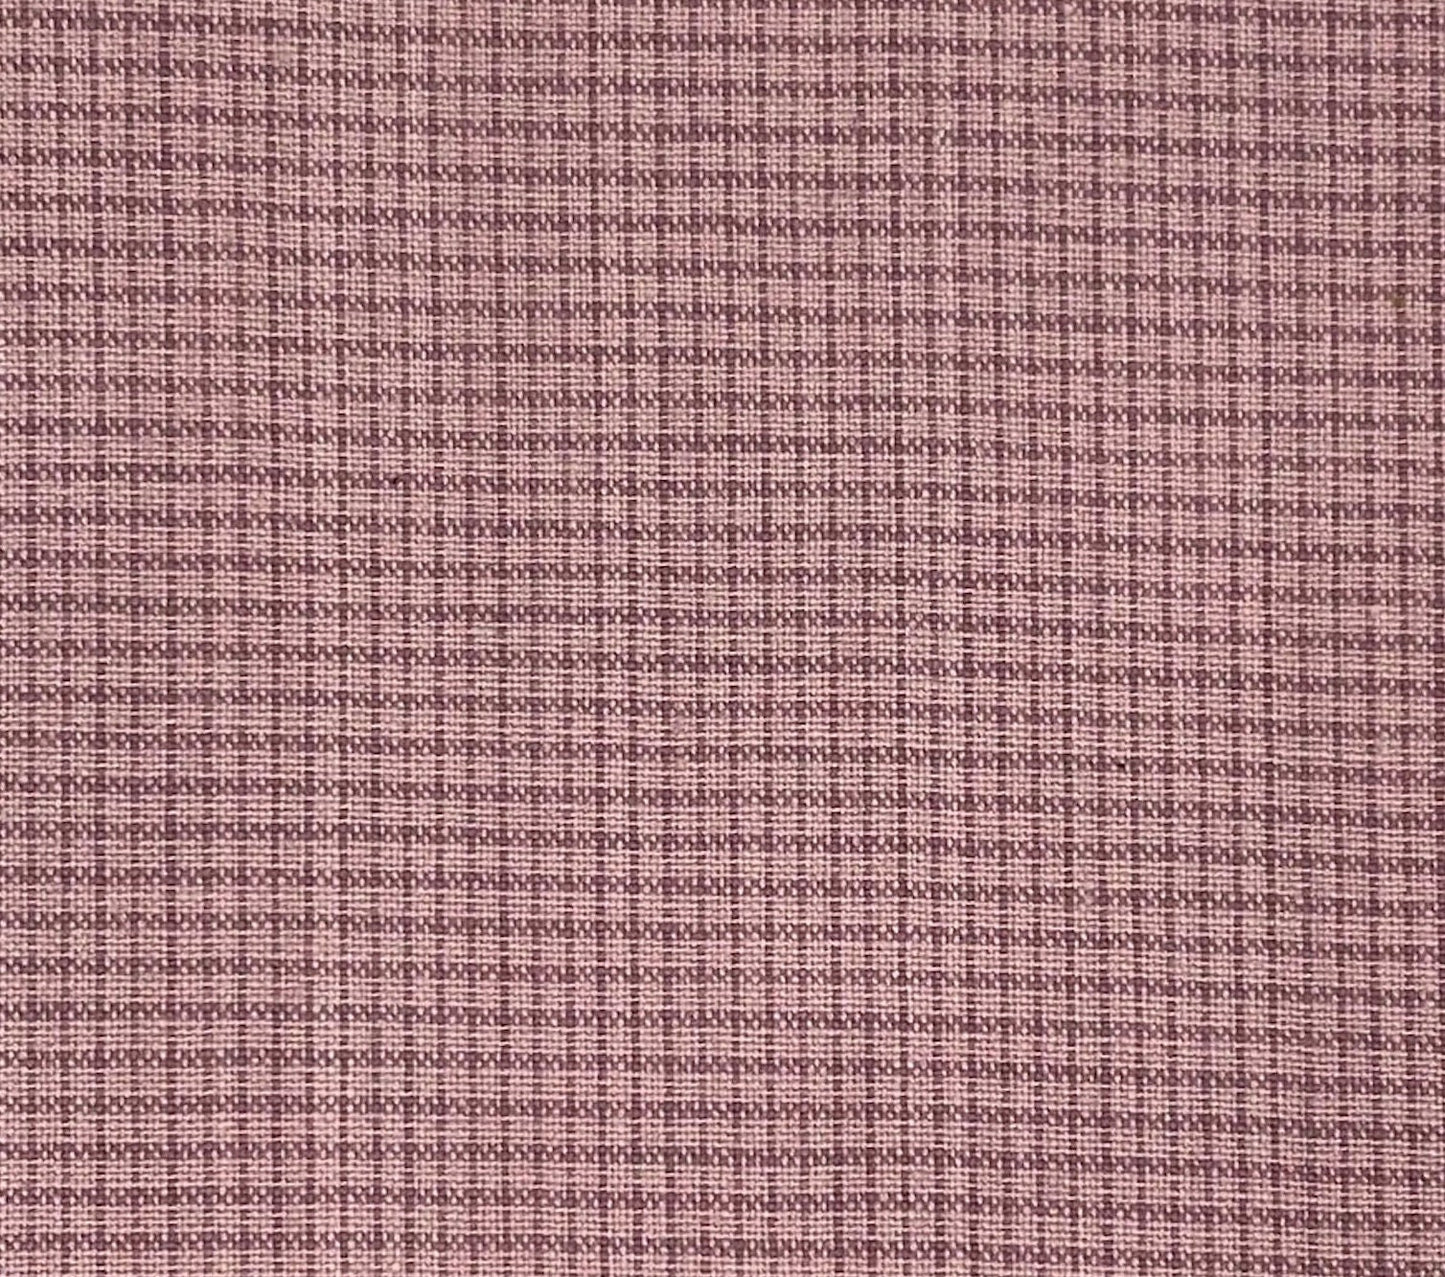 Manchester - Check - Lavender on Lilac - homesewn